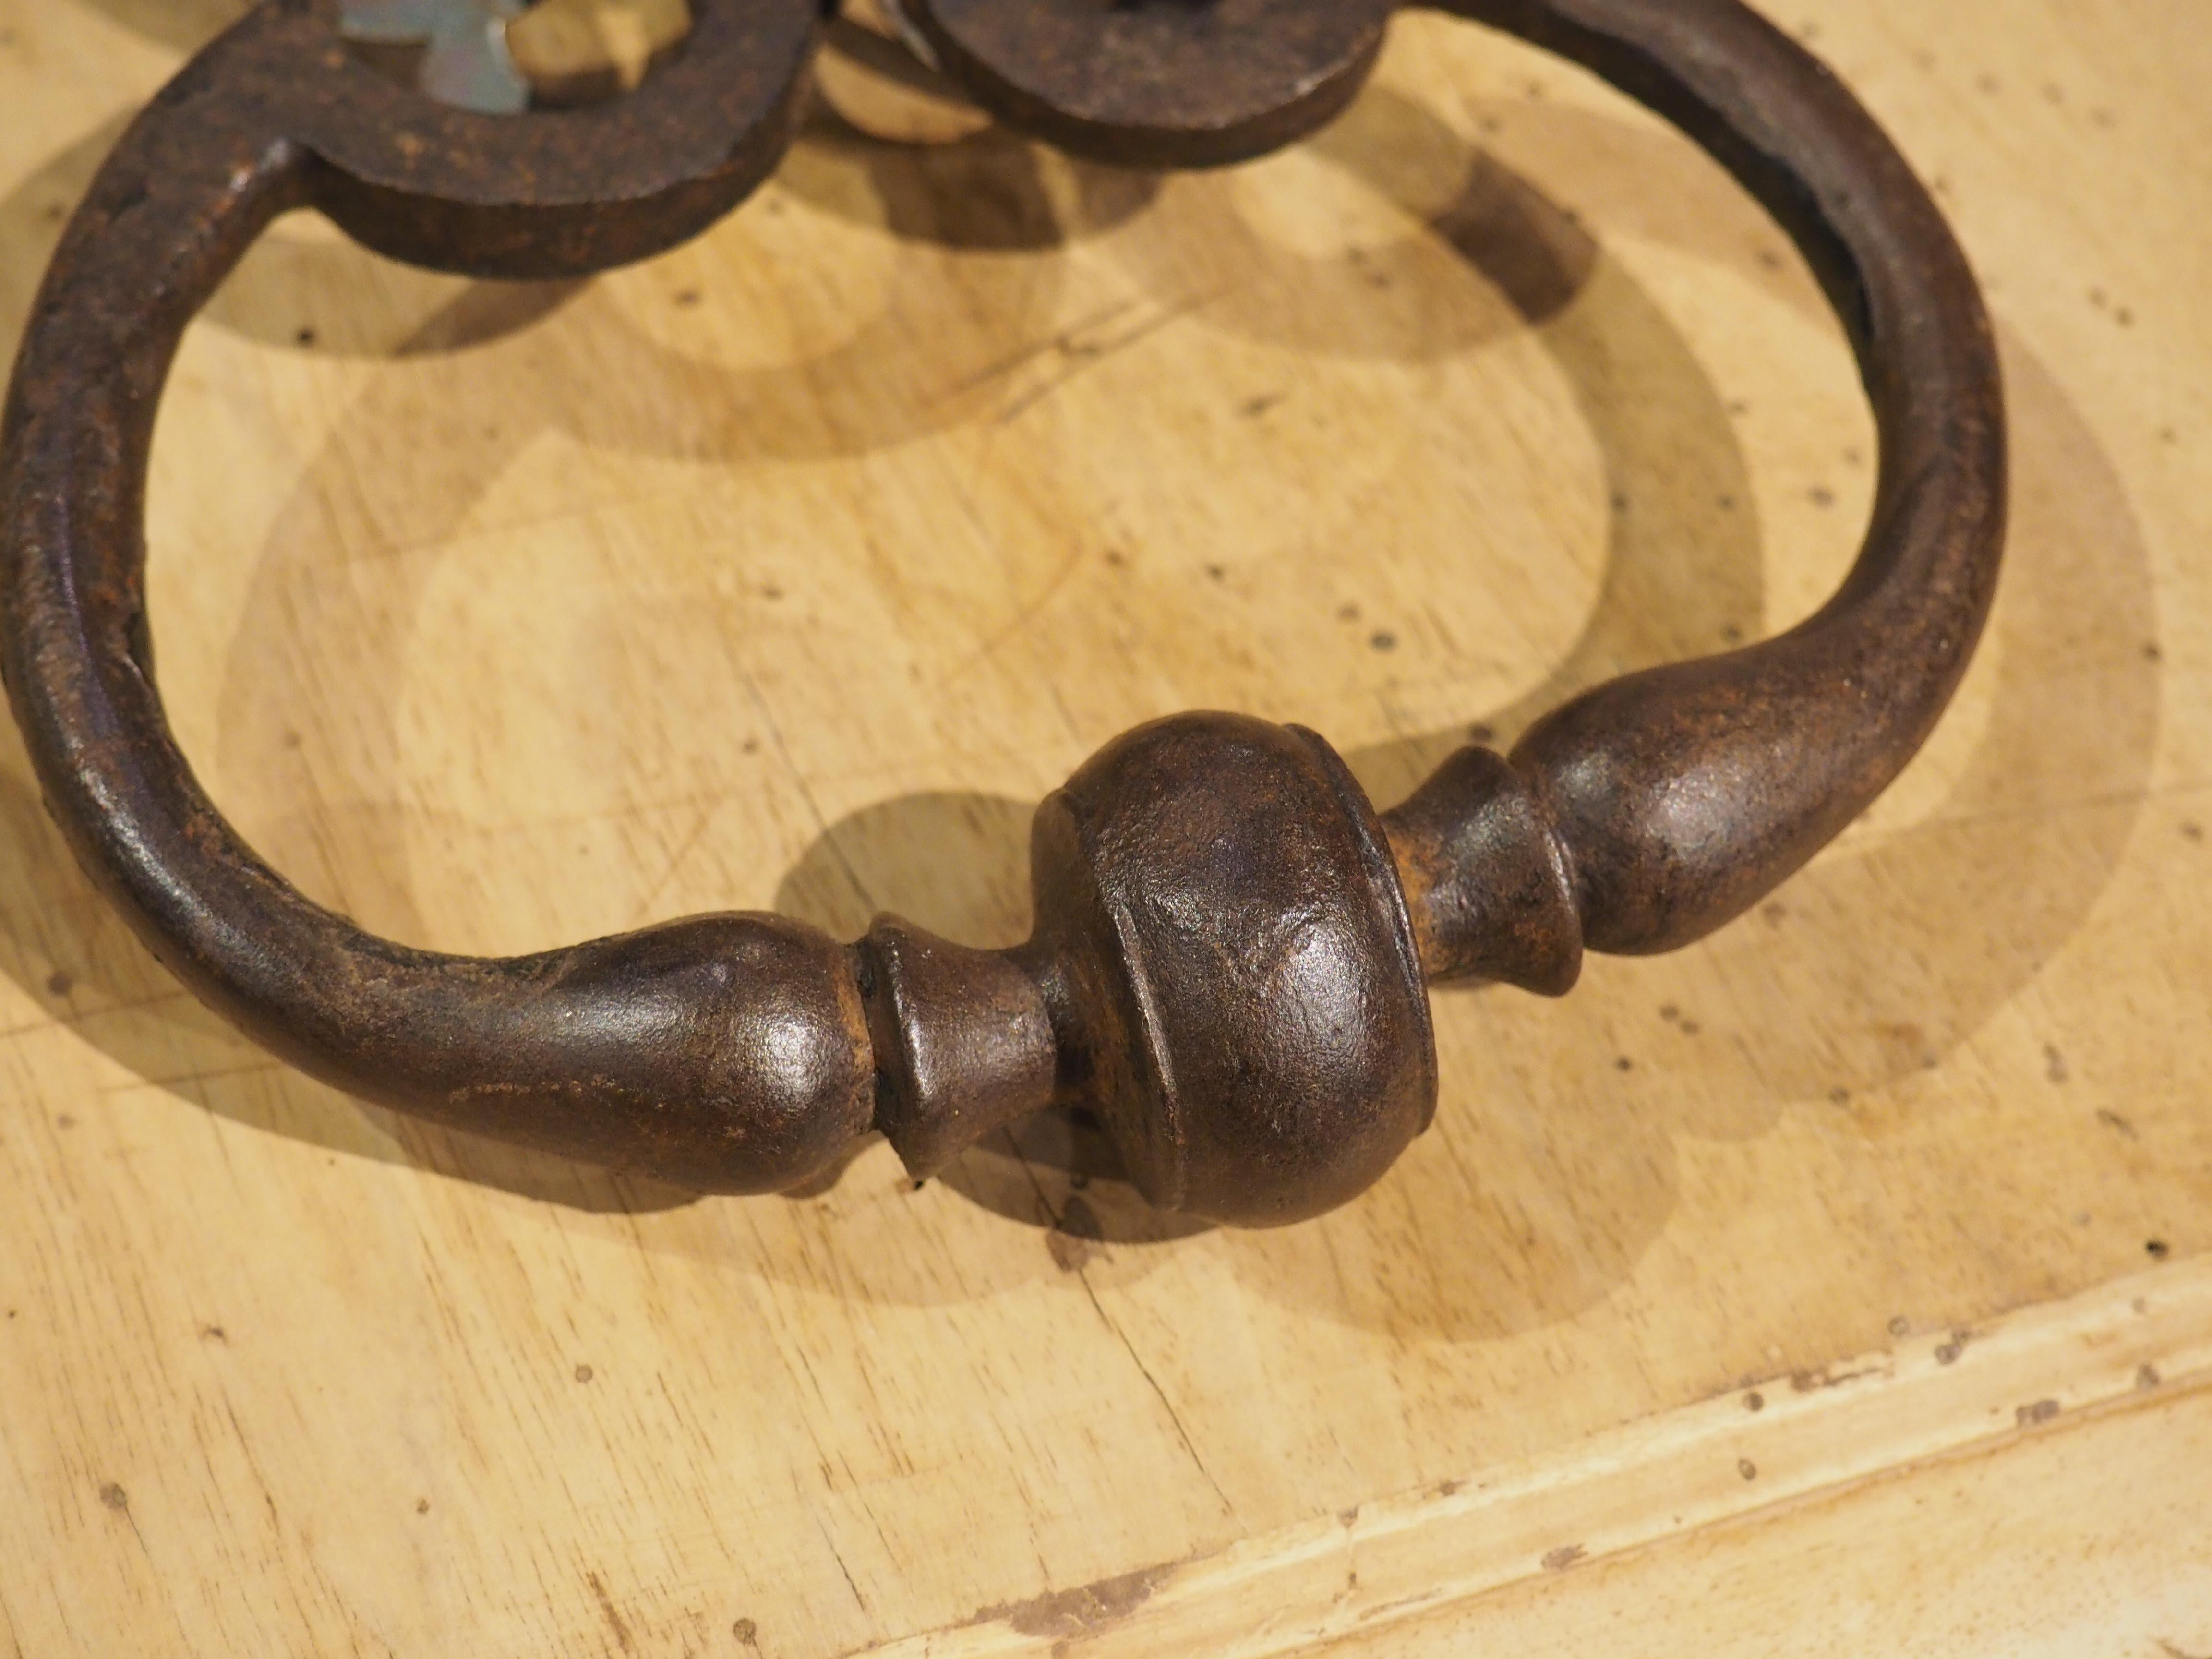 Hand-crafted in France in the 1700’s, this wrought iron door knocker features a pierced backplate in the shape of a stylized closed crown. There are small holes at the top and sides of the crown, where nails would help support the weight of the